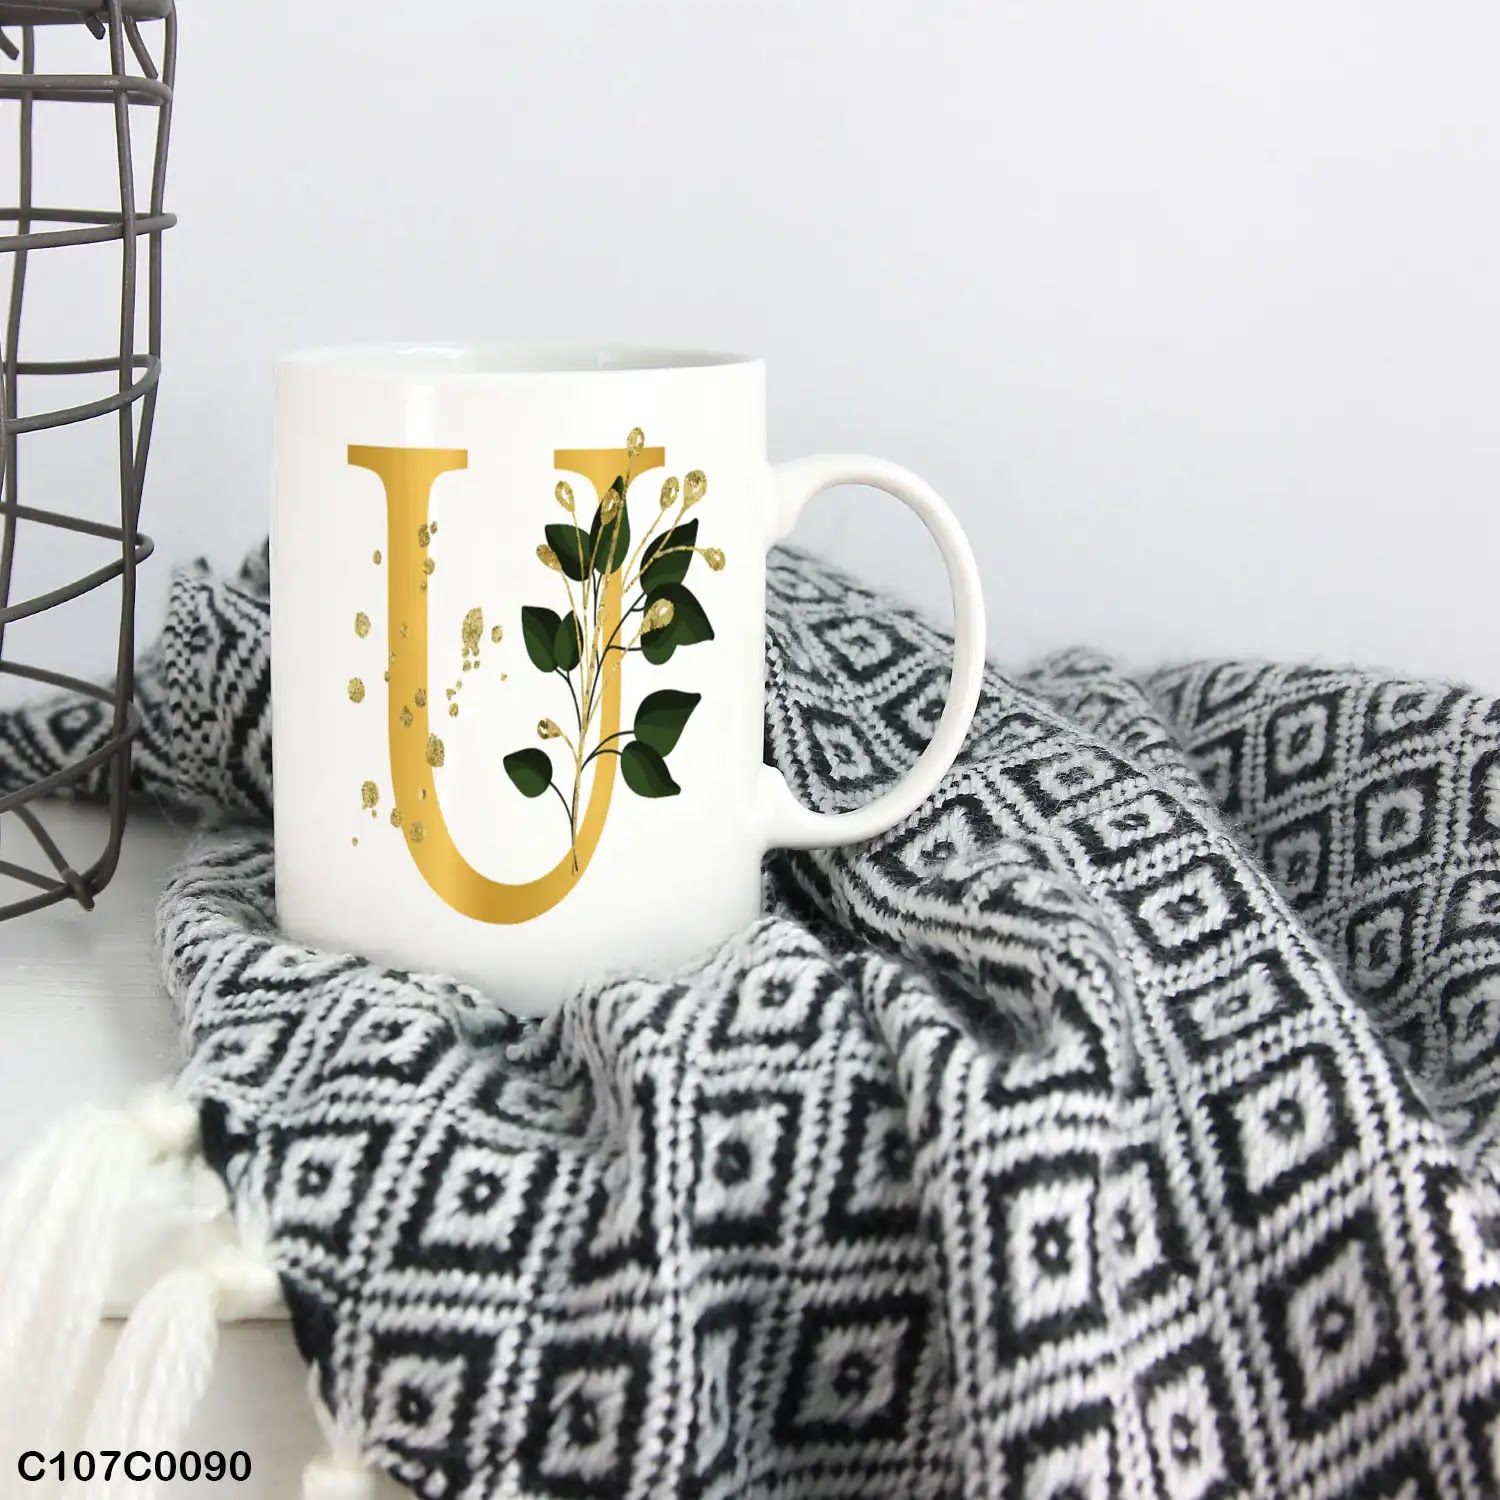 A white mug (cup) printed with gold Letter "U"and small green branch